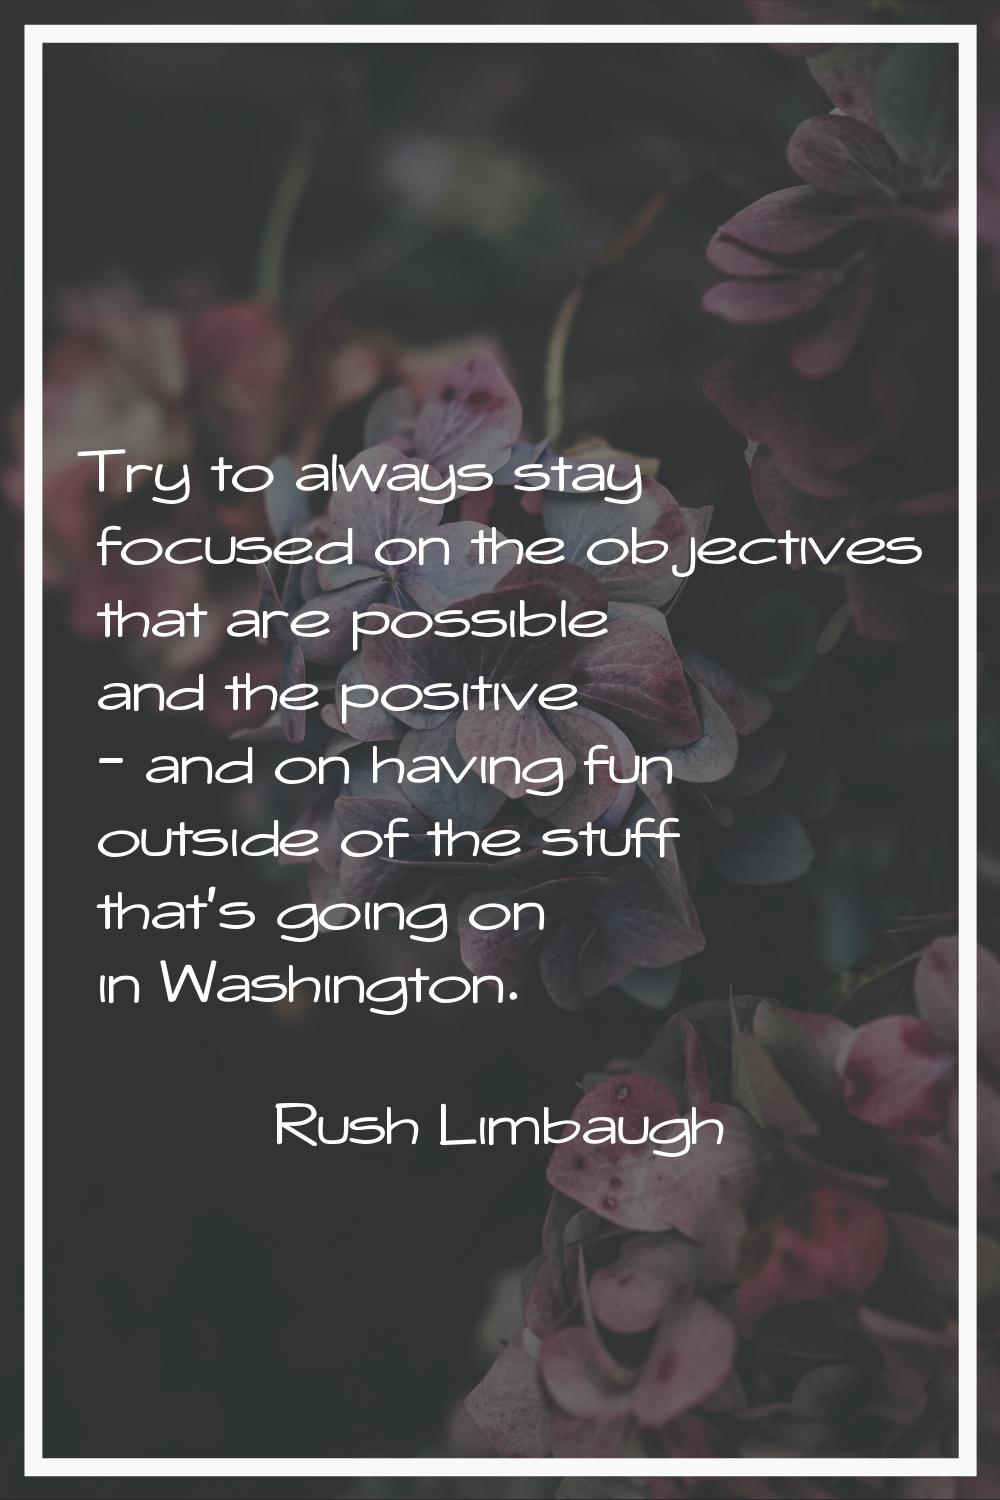 Try to always stay focused on the objectives that are possible and the positive - and on having fun